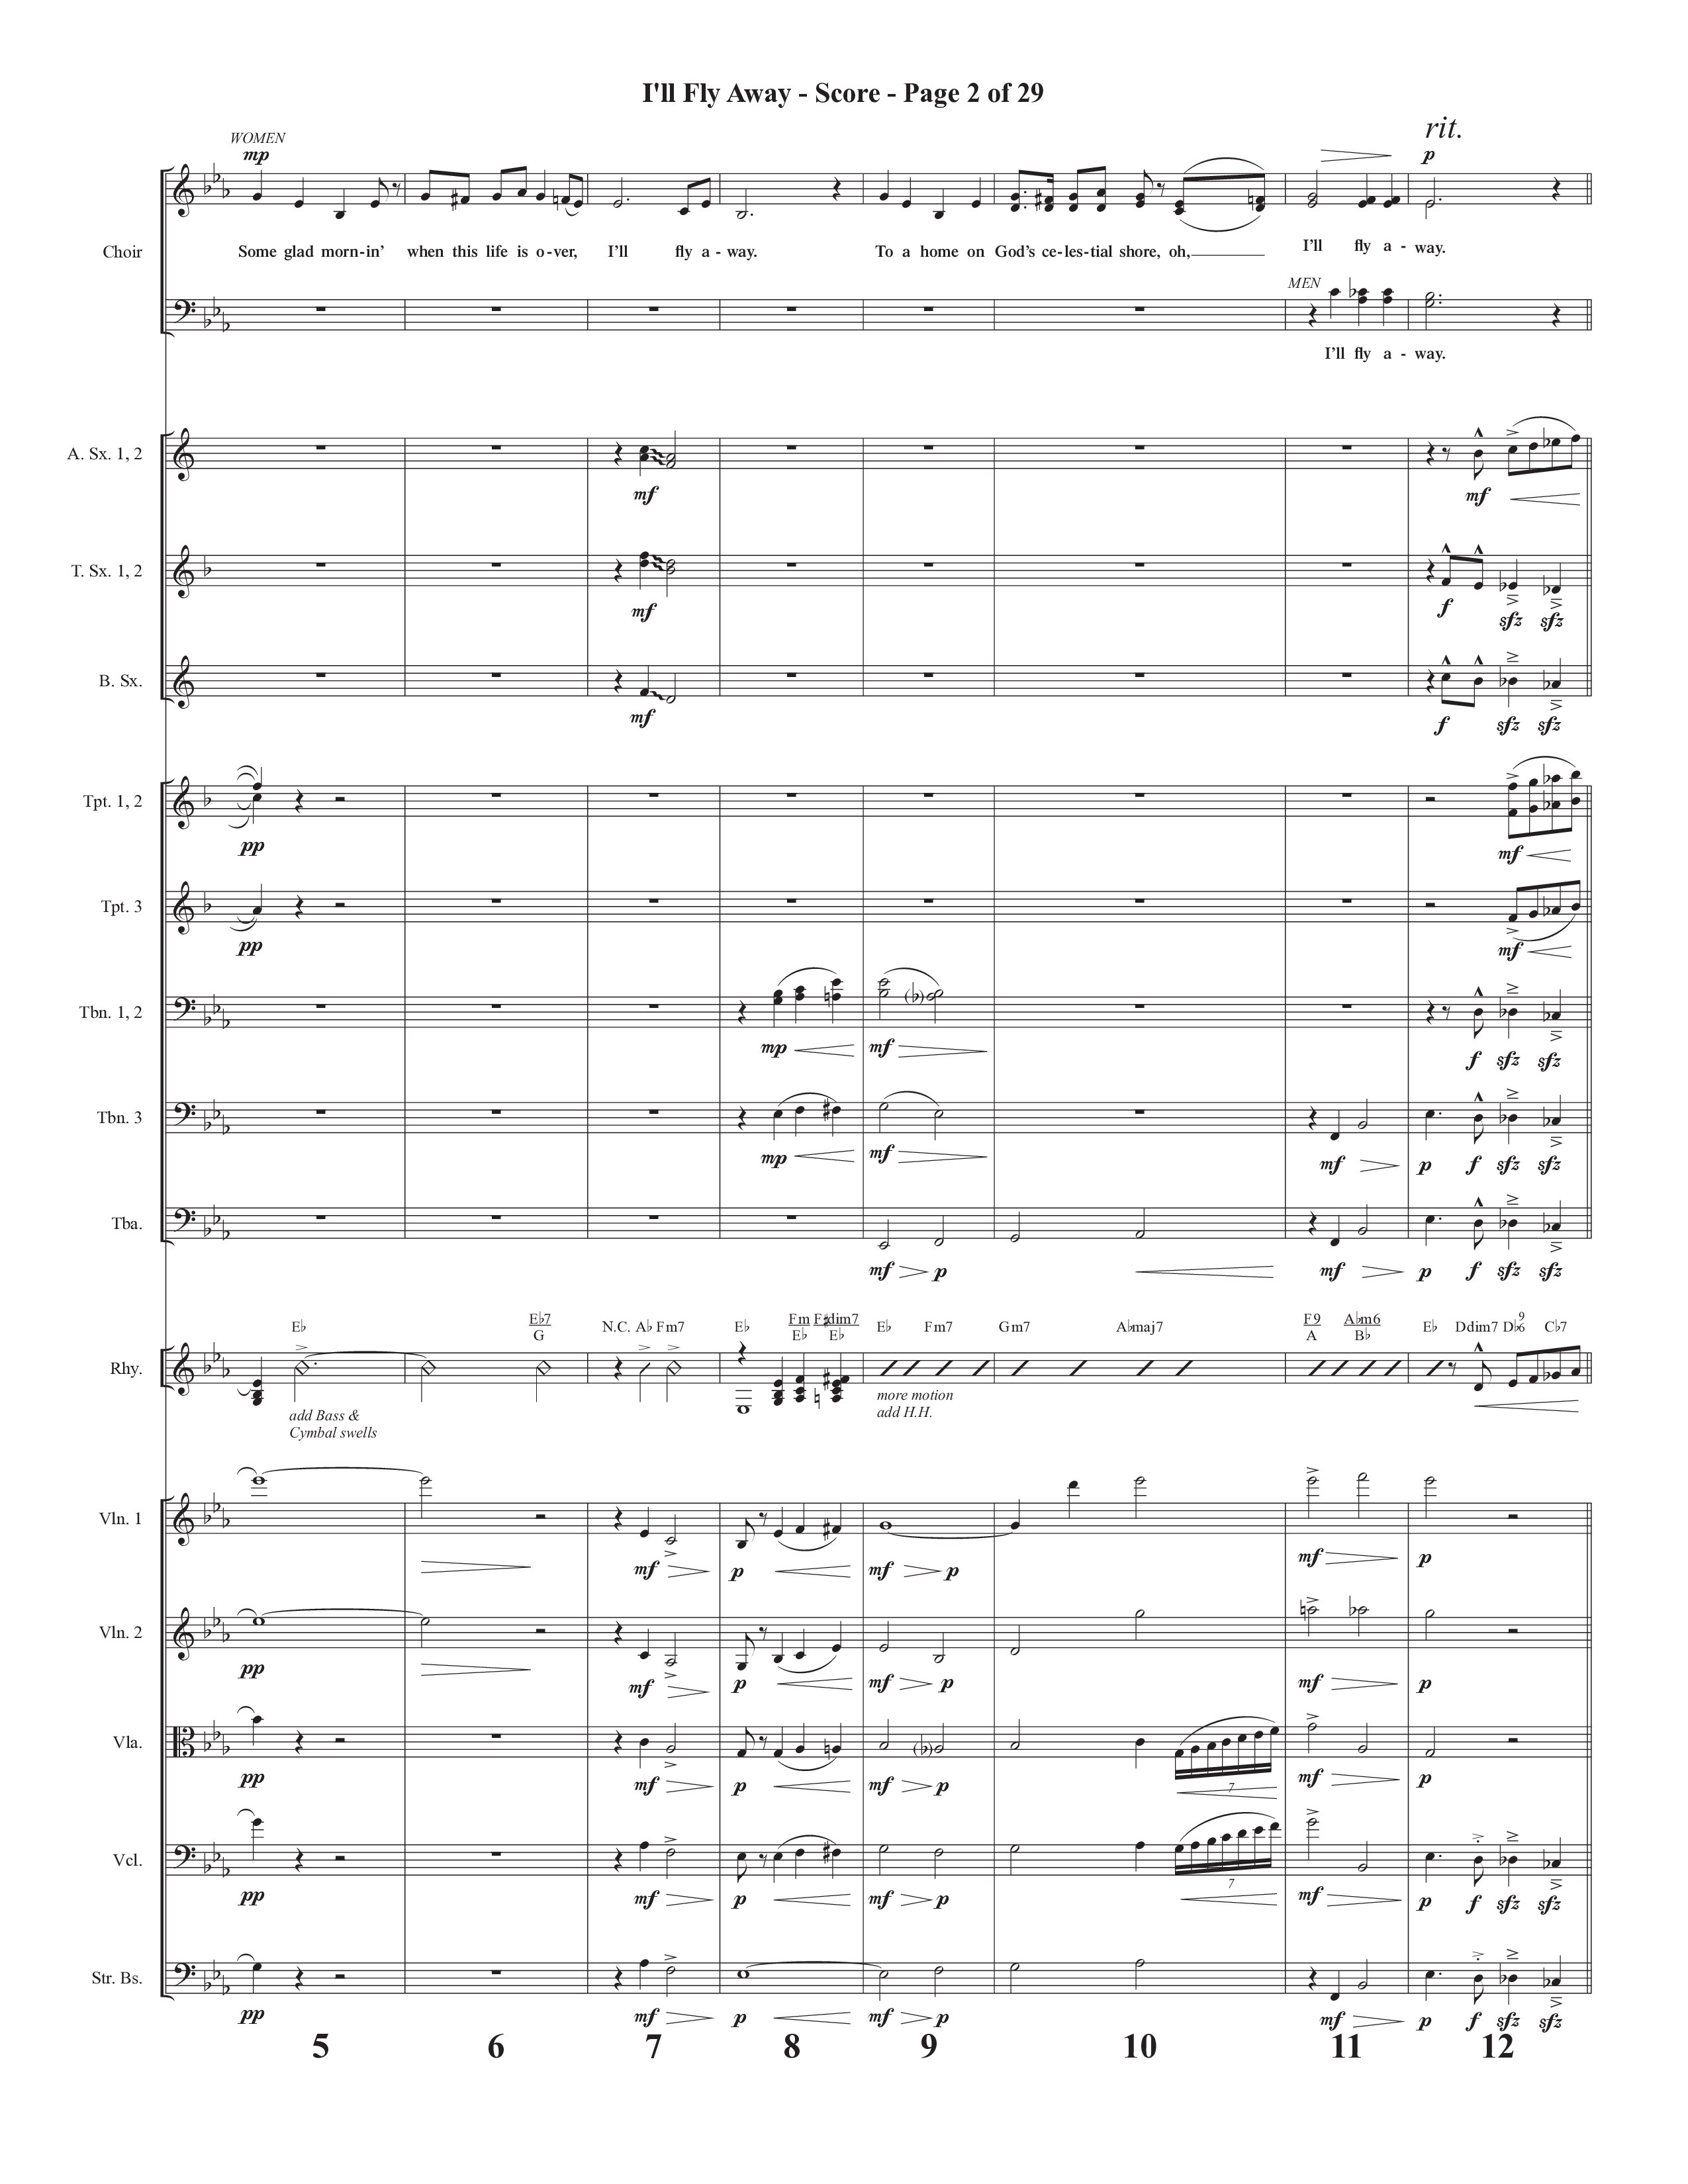 I'll Fly Away (Choral Anthem SATB) Orchestration (Semsen Music / Arr. Michael Lee)